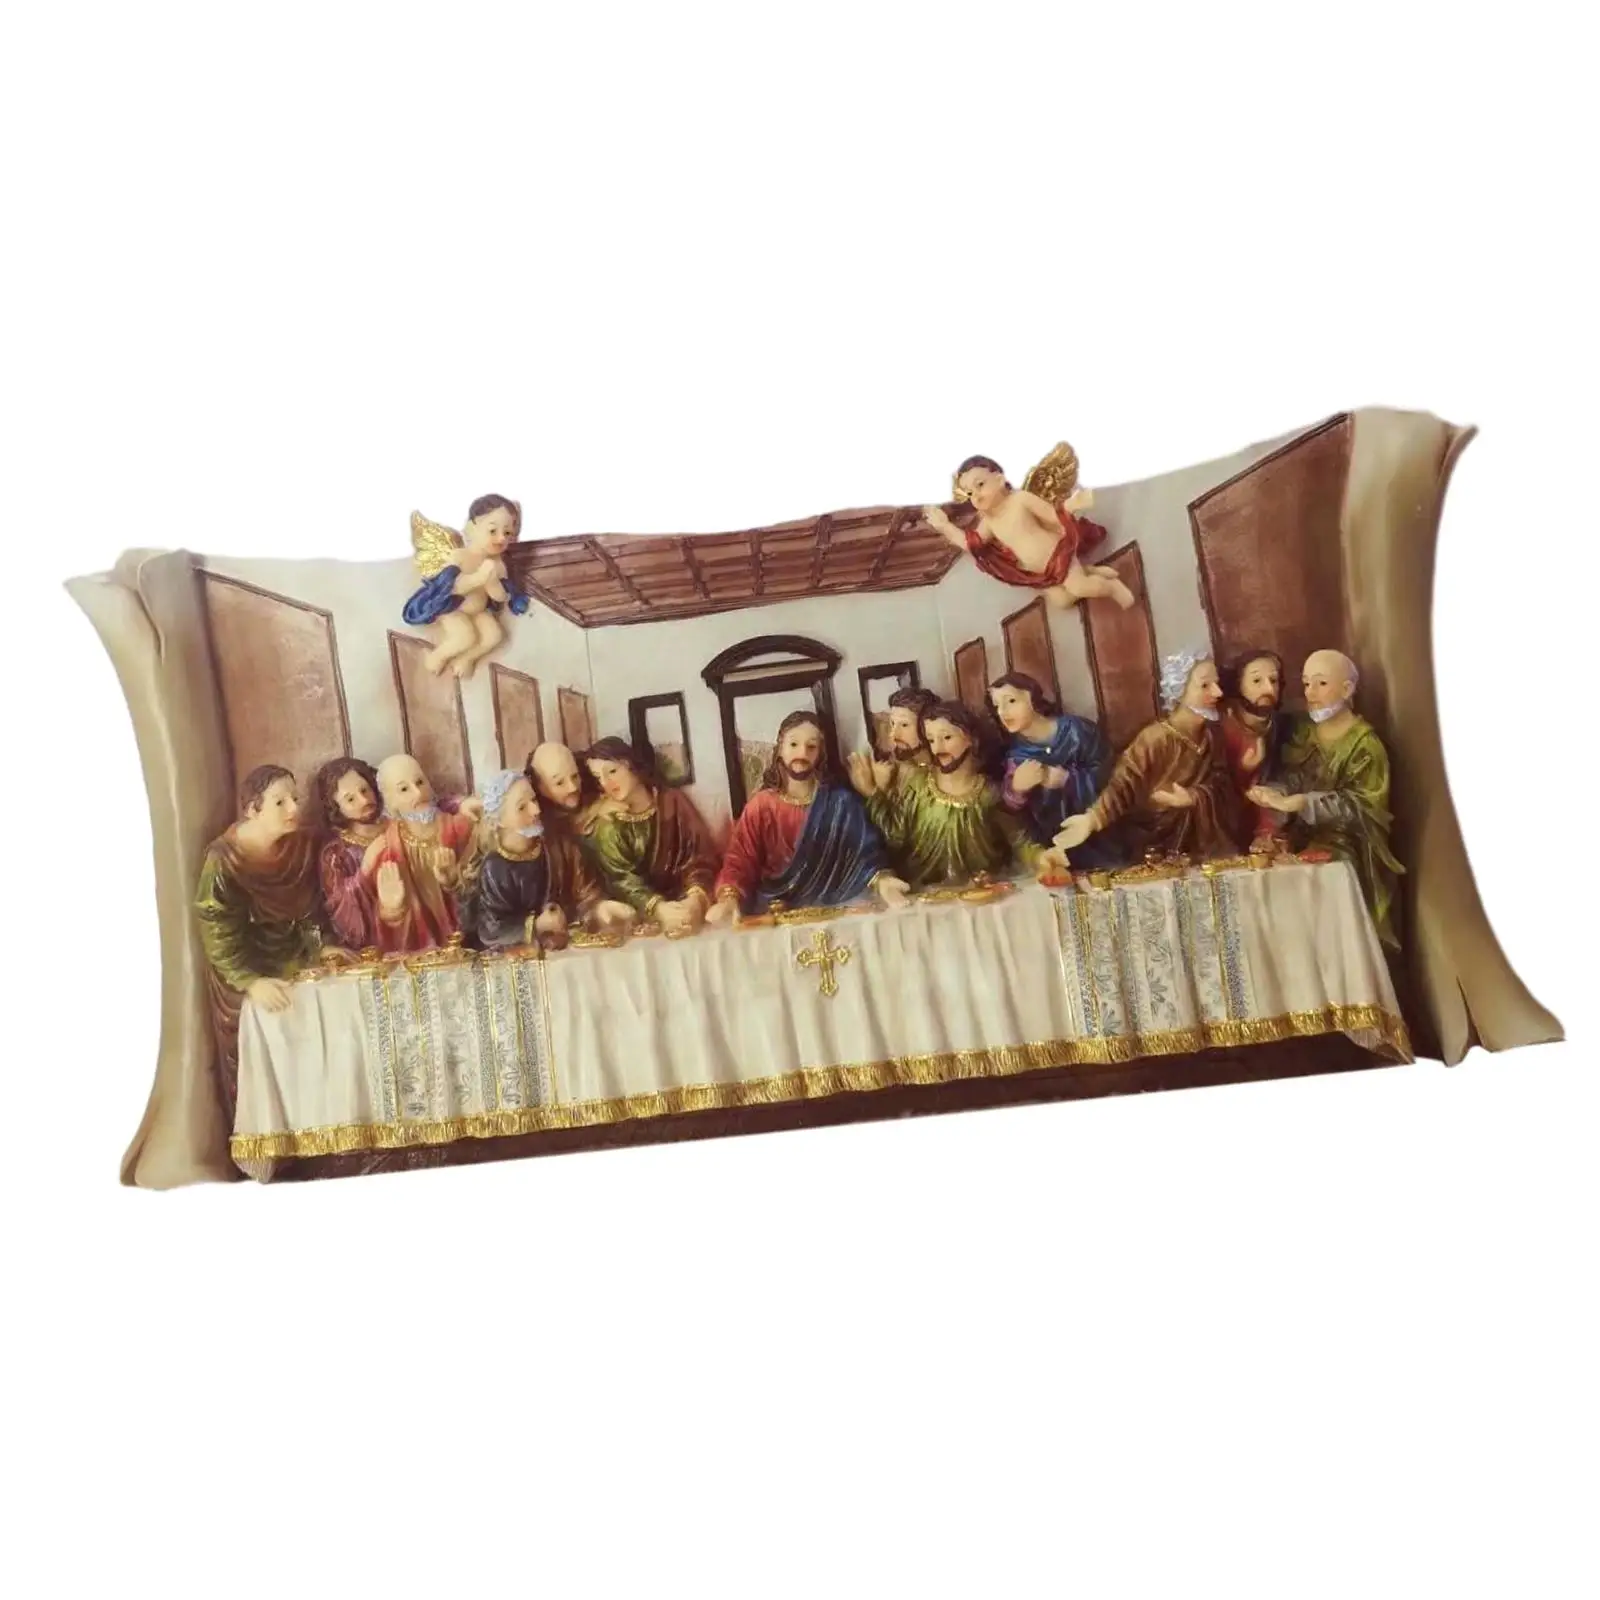 Resin Last Supper Sculpture Statue Office Decoration Jesus and 12 Disciples for Bedroom Living Room Home Office Collection Gifts